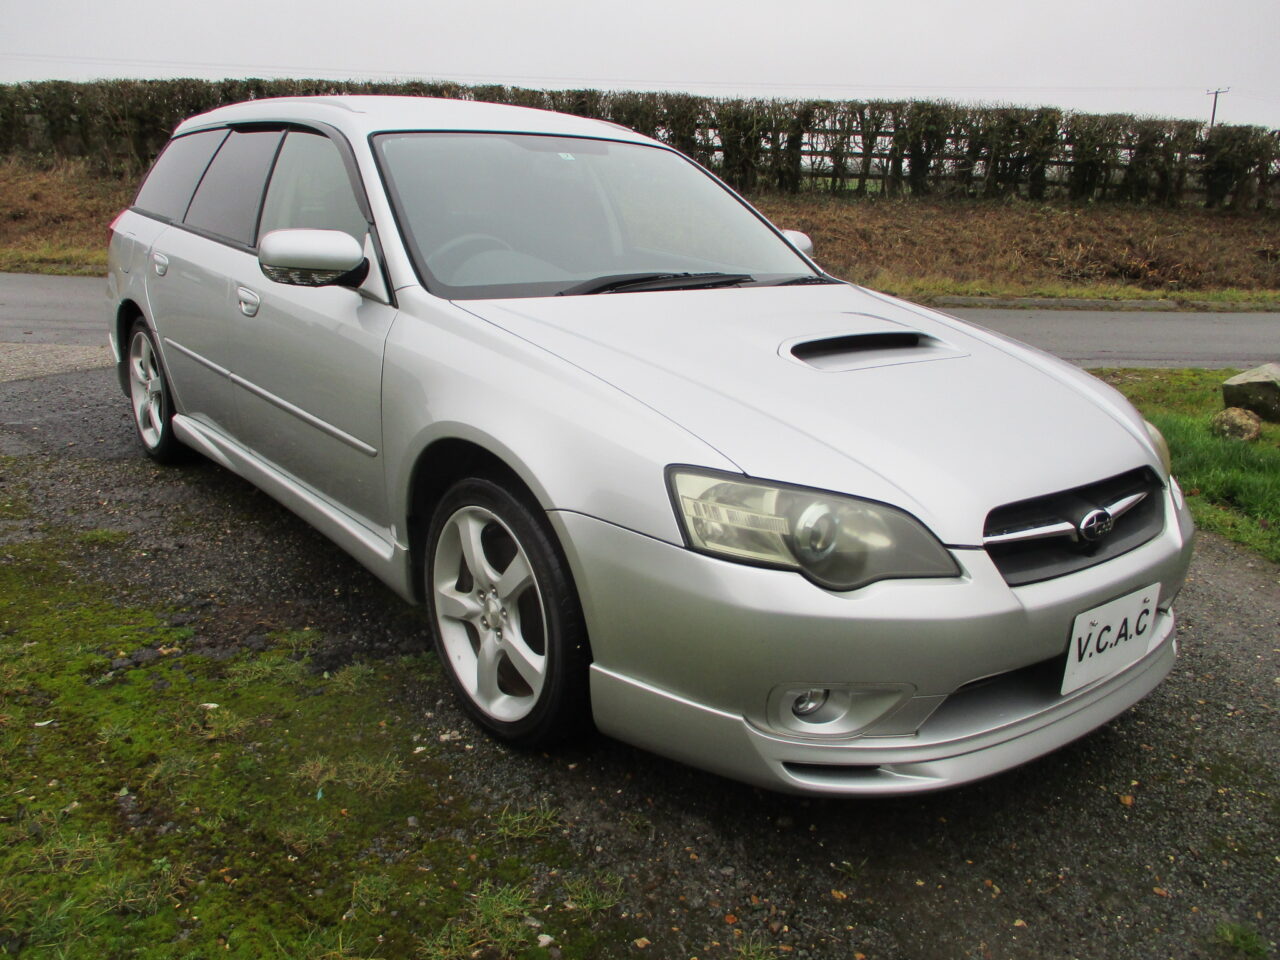 2003 Subaru Legacy GT Turbo Estate Automatic. 37500 Miles.SOLD | Valley